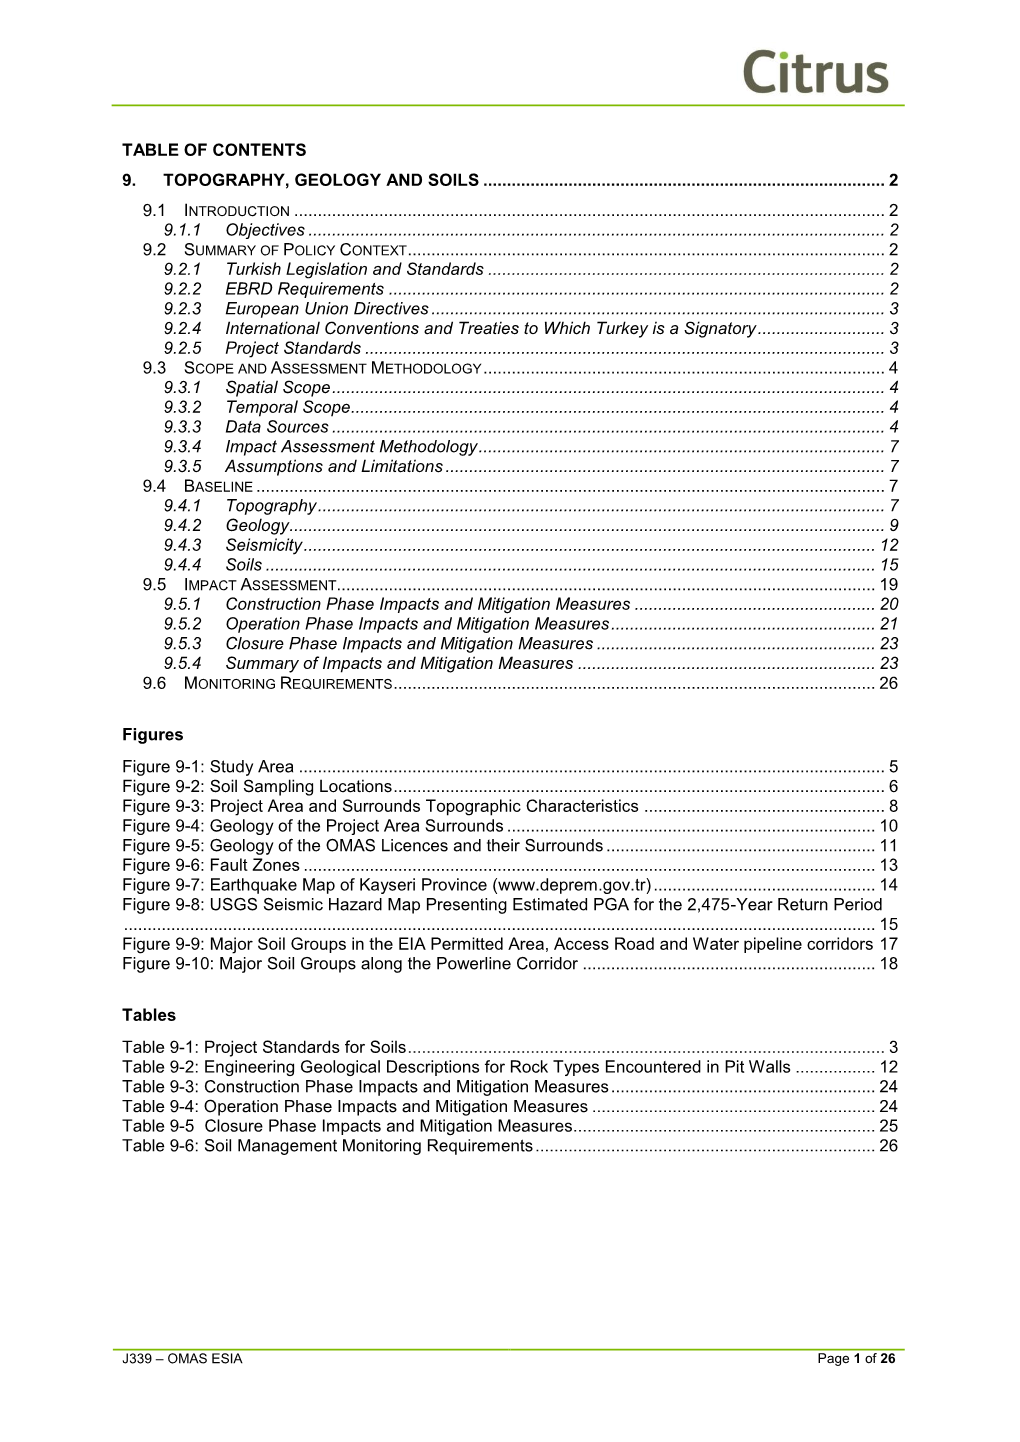 Table of Contents 9. Topography, Geology and Soils